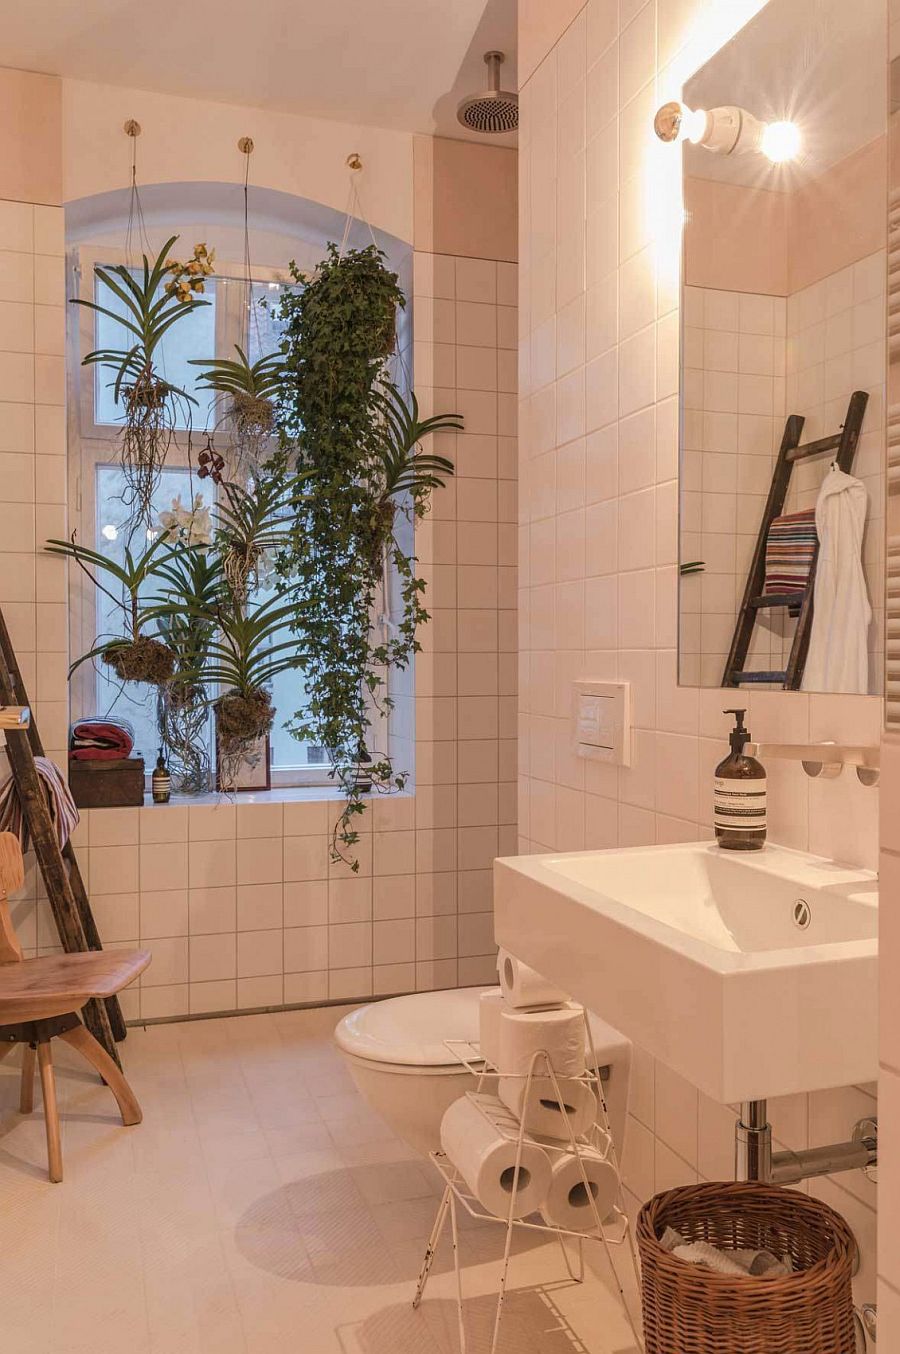 Bathroom in white filled with hanging plants